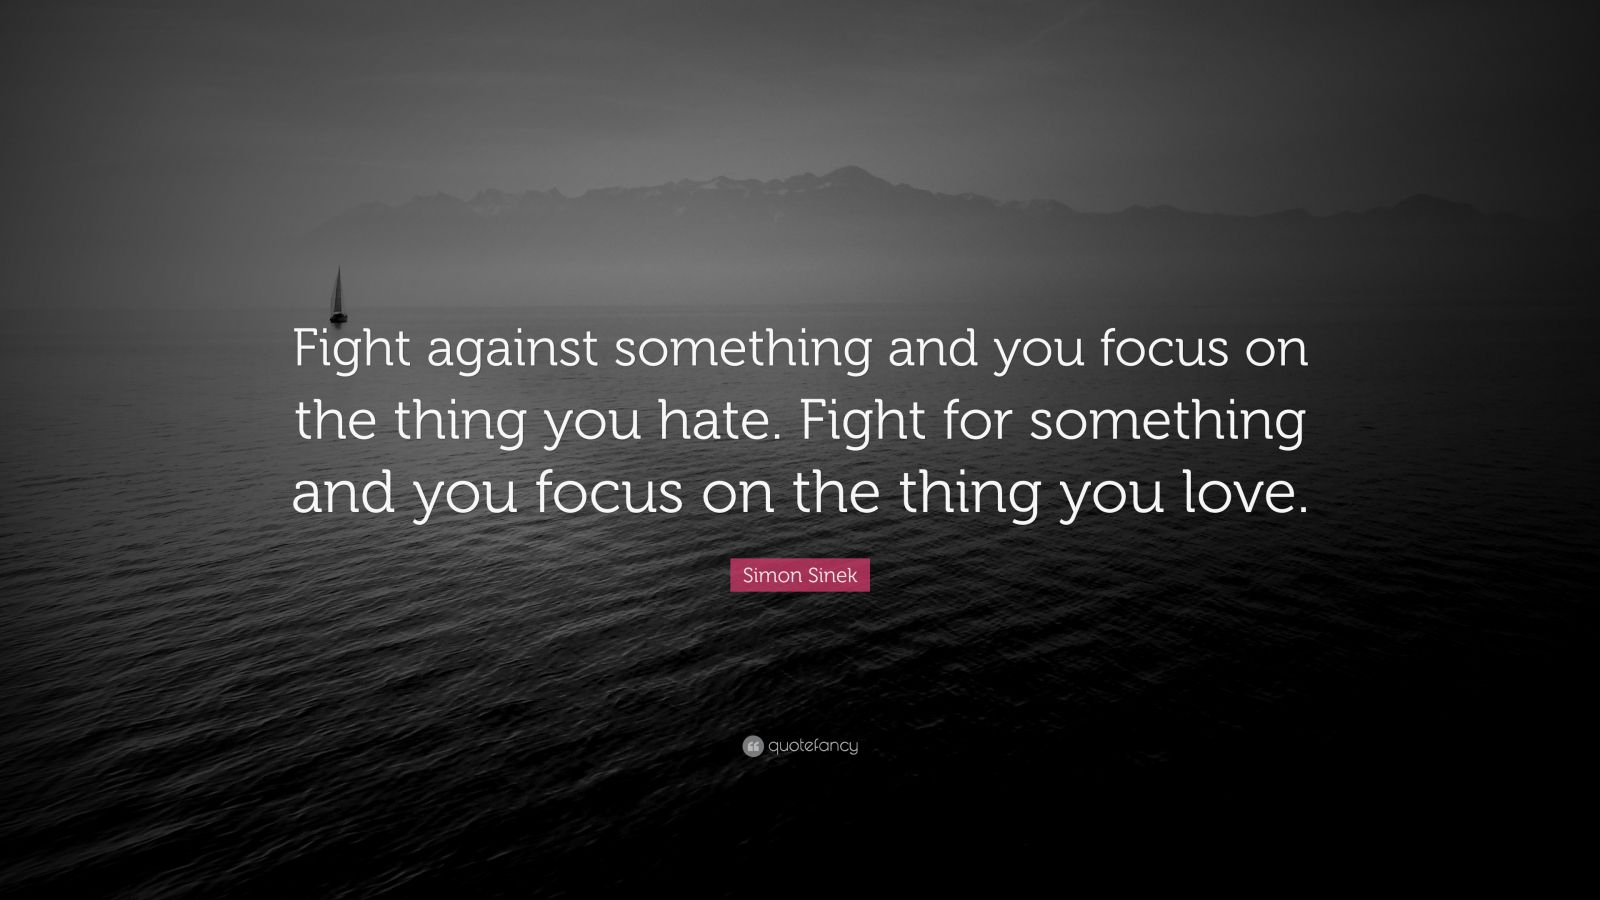 Simon Sinek Quote: “Fight against something and you focus on the thing ...